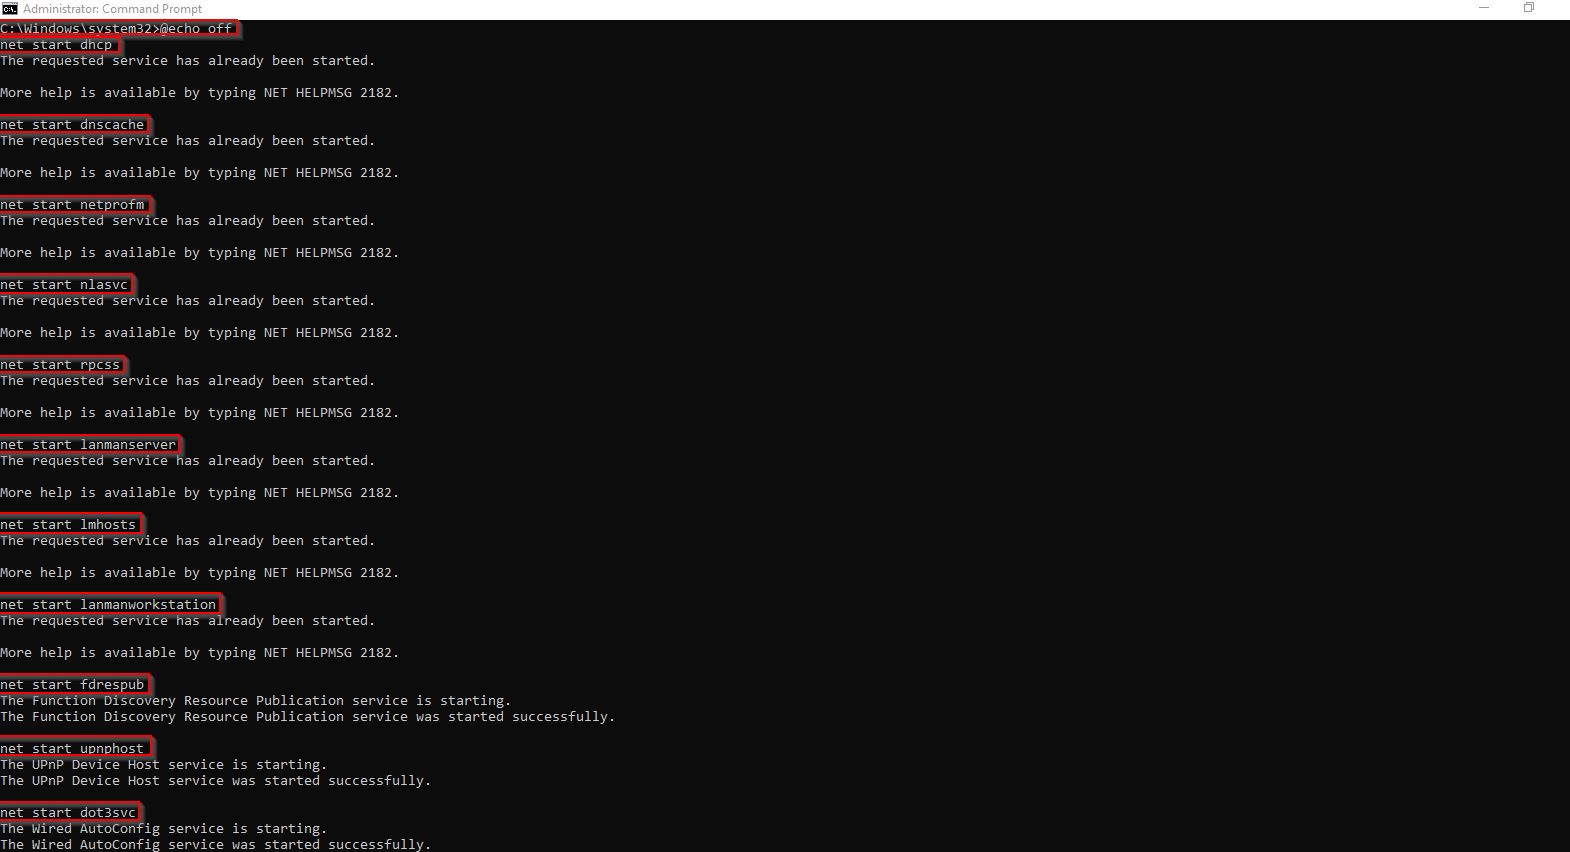 Running network services through command prompt